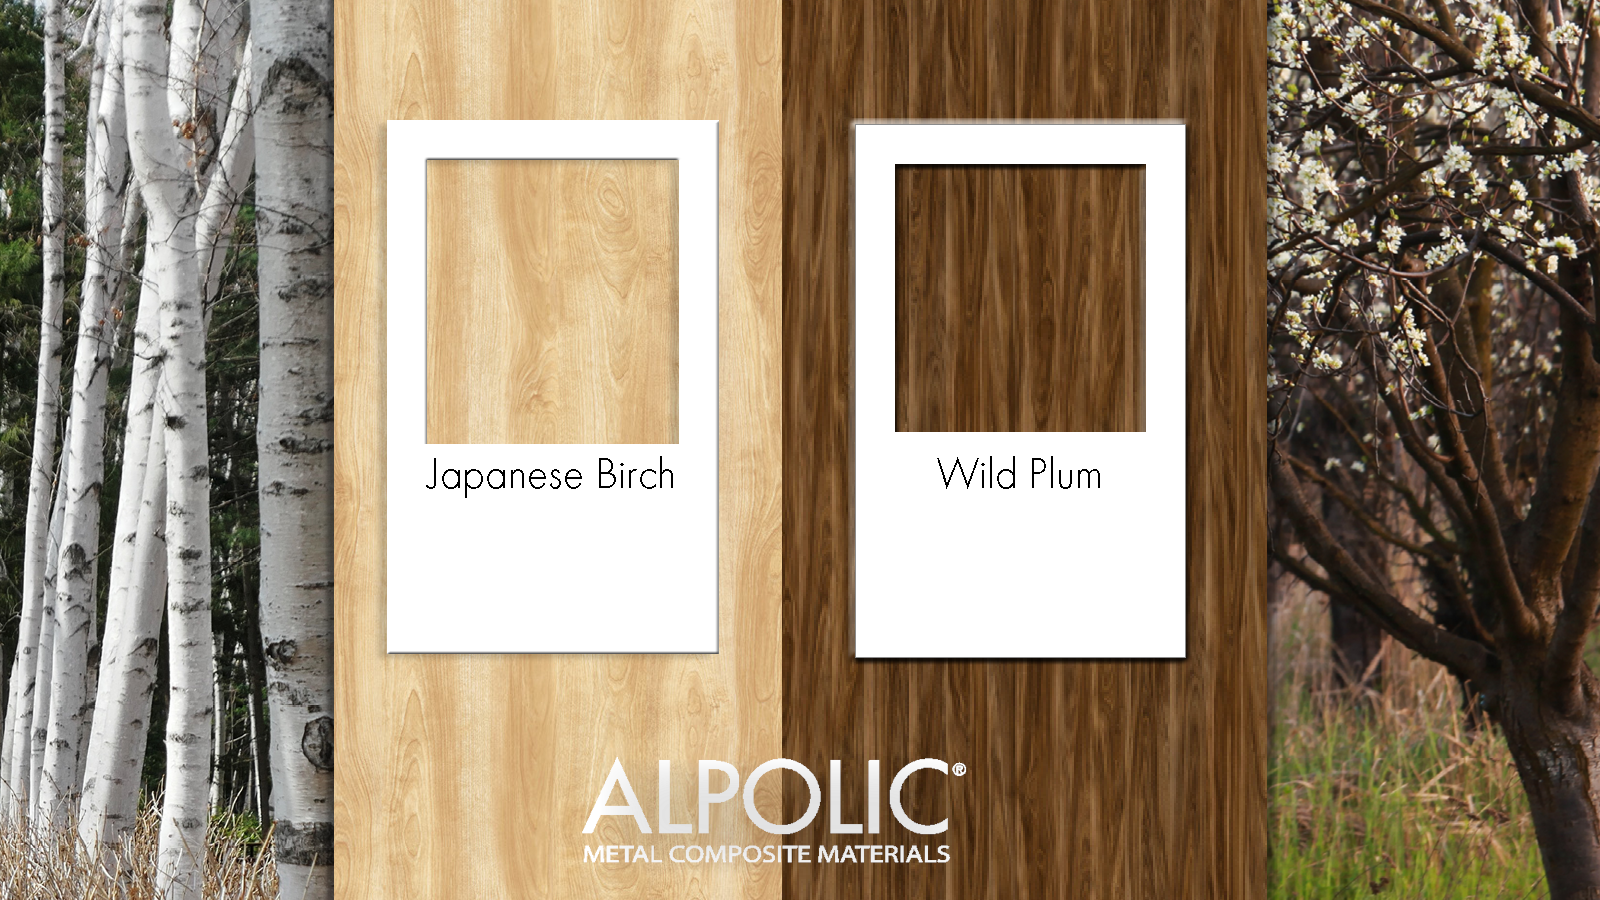 ALPOLIC Adds New Patterns to Timber Series Finishes